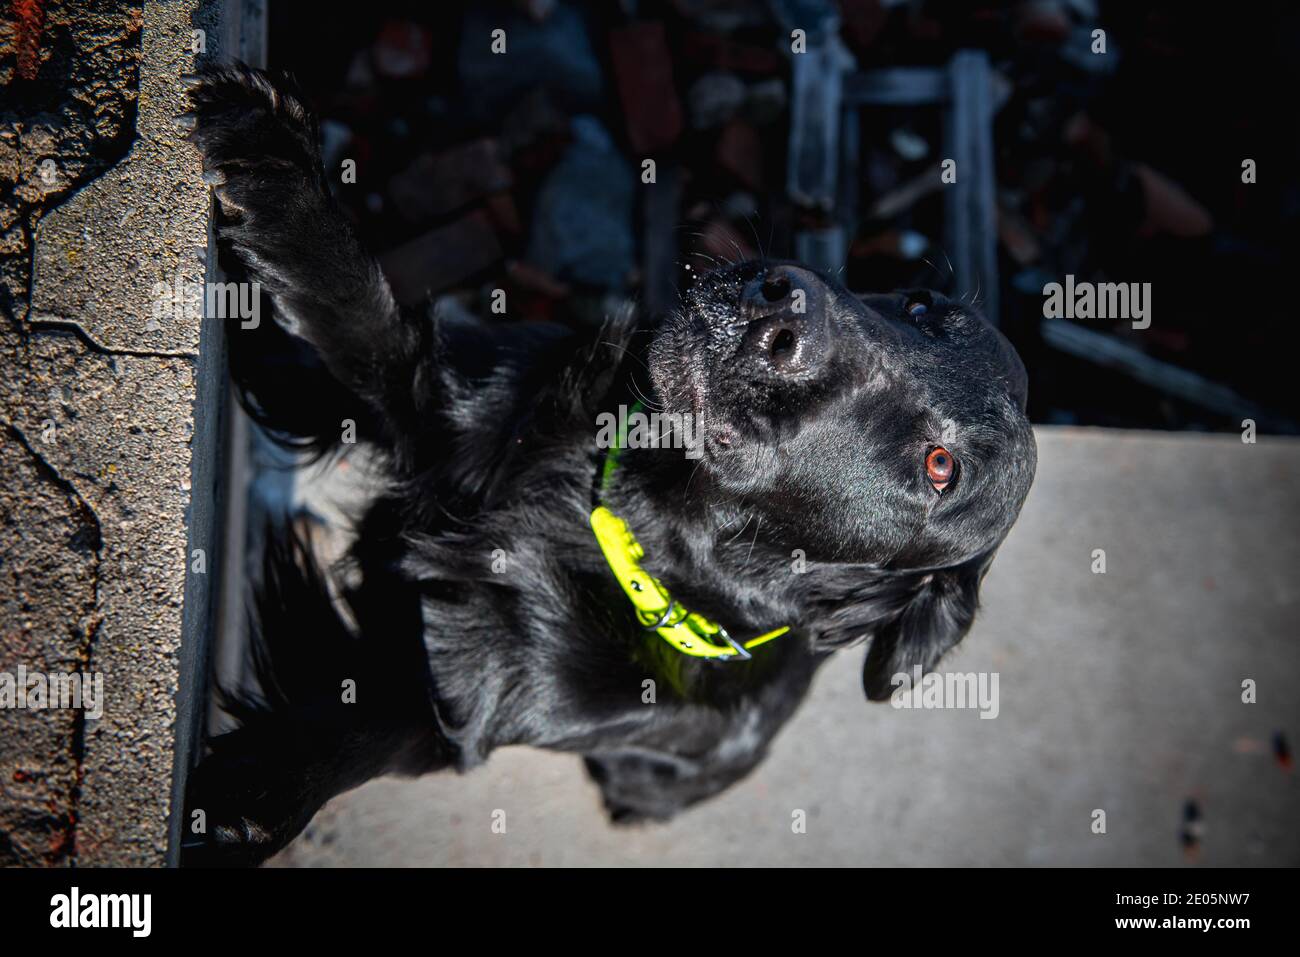 Dog looking for injured people in ruins after earthquake. Stock Photo